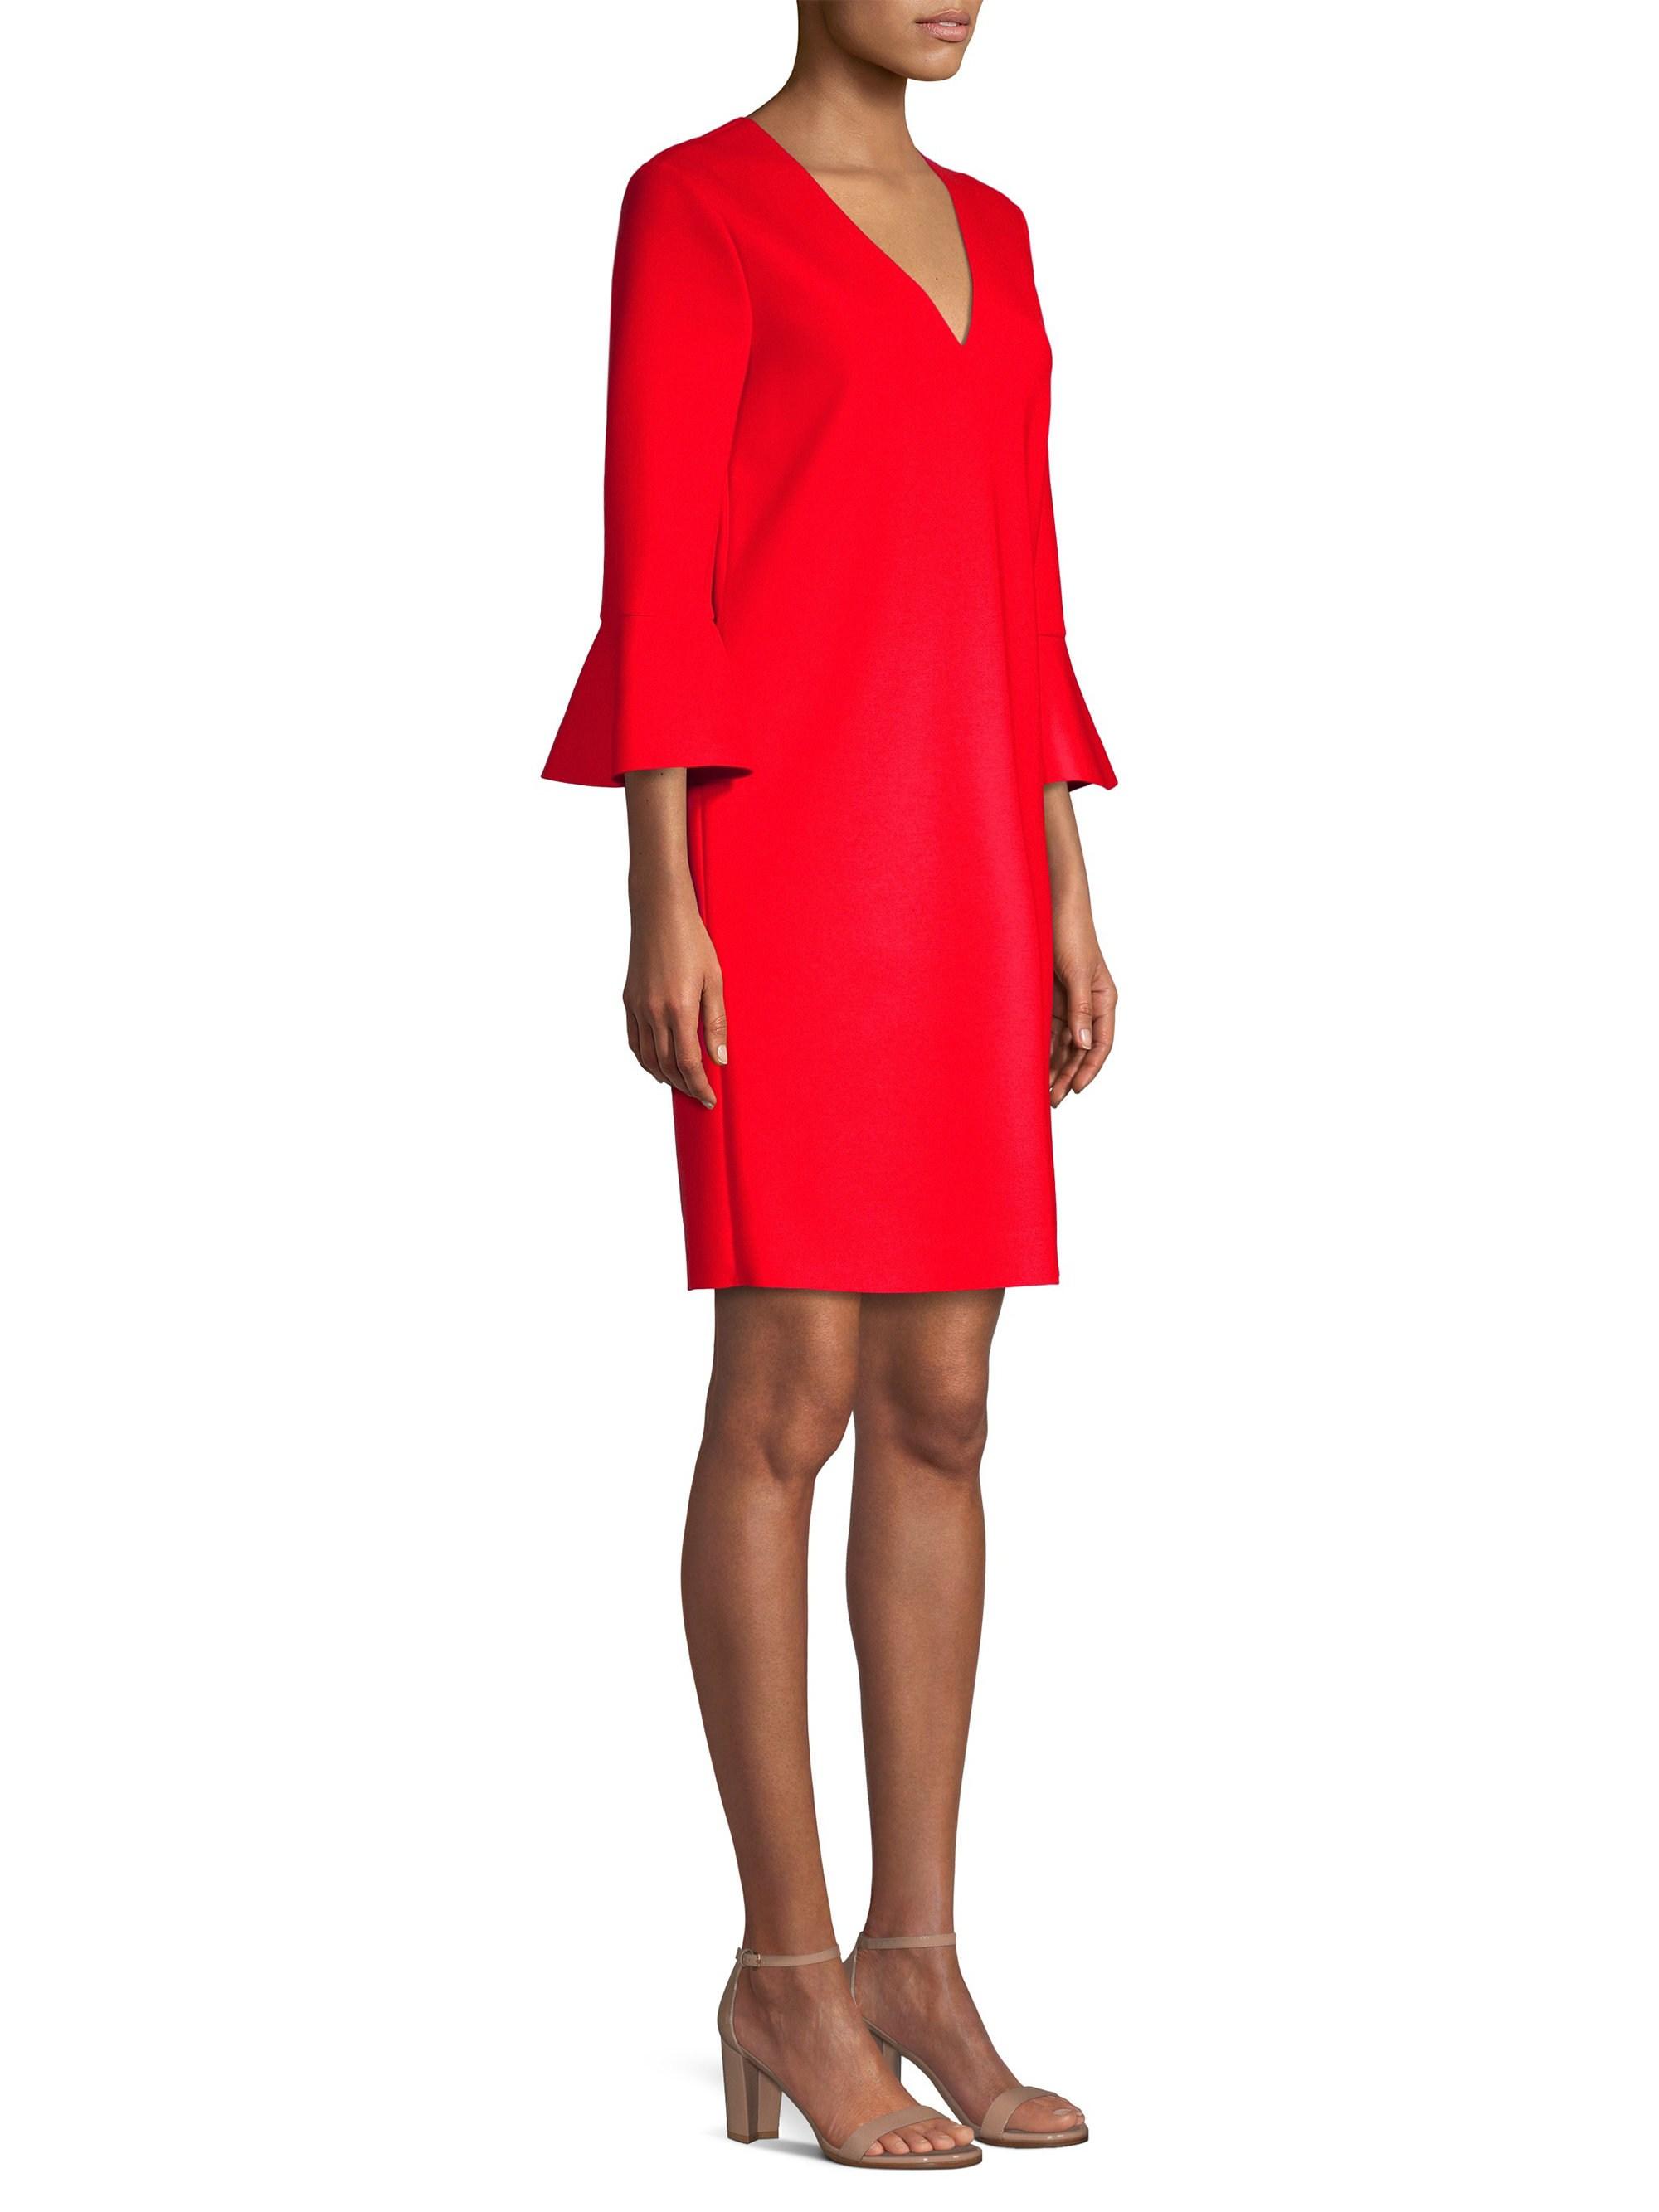 ESCADA Synthetic Darielle Bell Sleeve Dress in Bright Red (Red) - Lyst